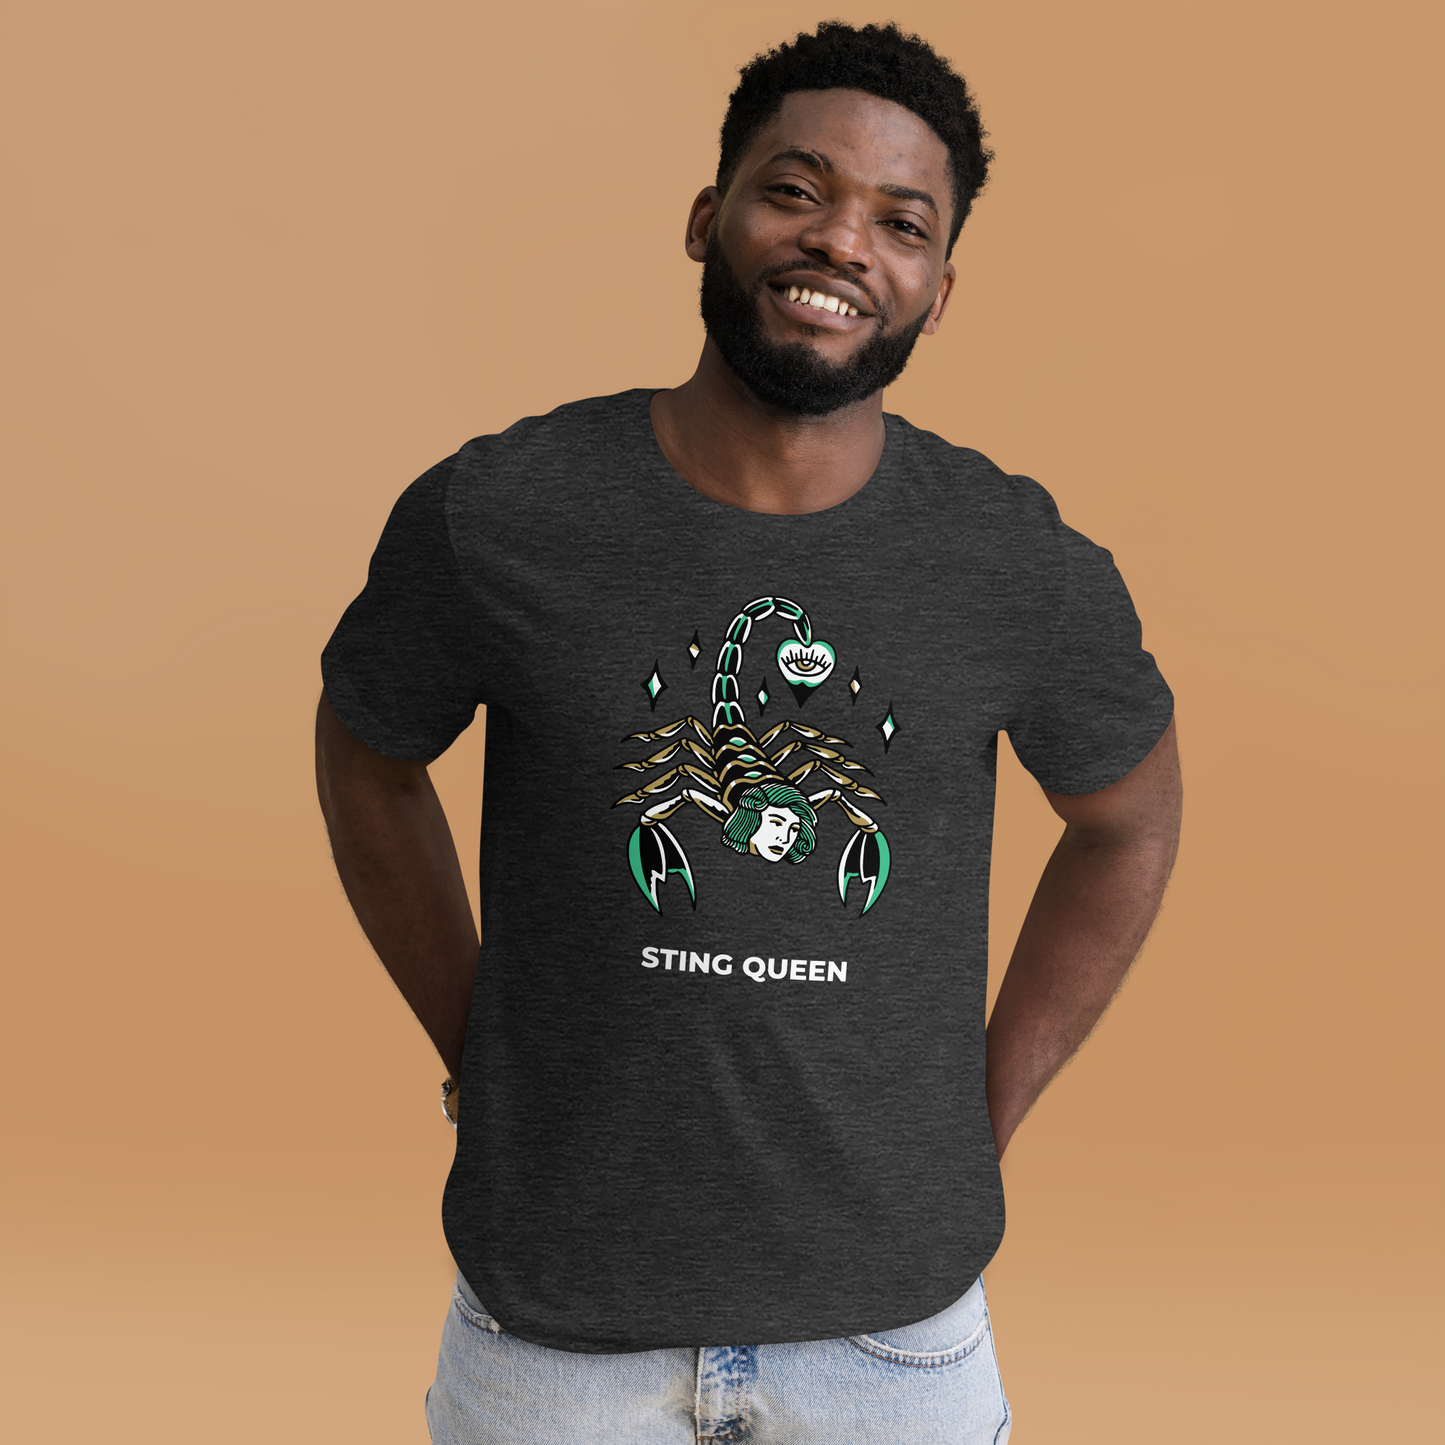 Smiling man wearing a Dark Grey Heather Premium Scorpion Tee featuring The Sting Queen graphic on the chest - Cool Graphic Scorpion Tees - Boozy Fox